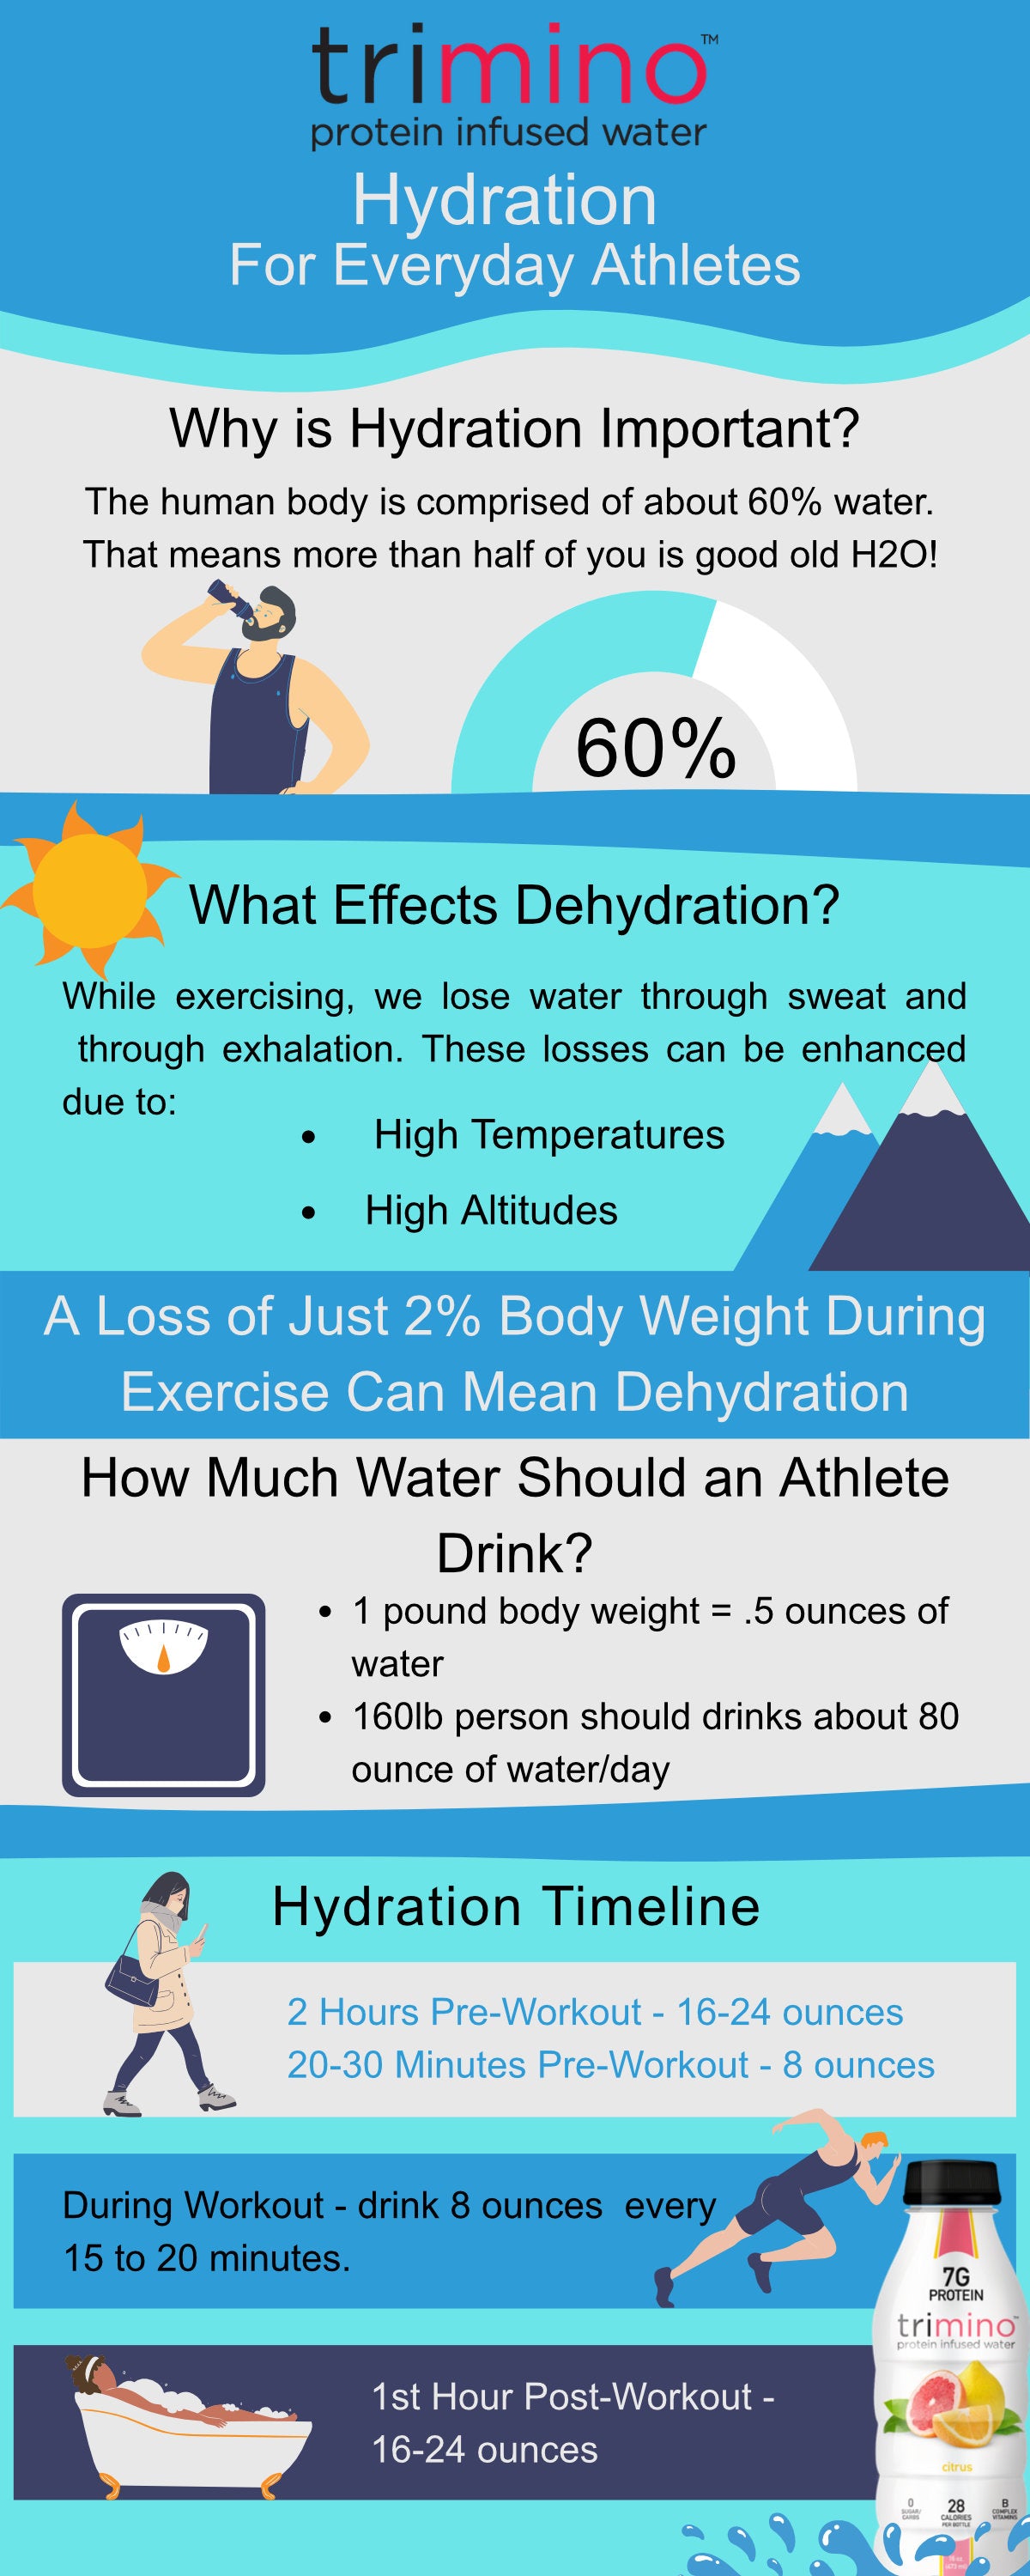 Hydration guidelines for athletes